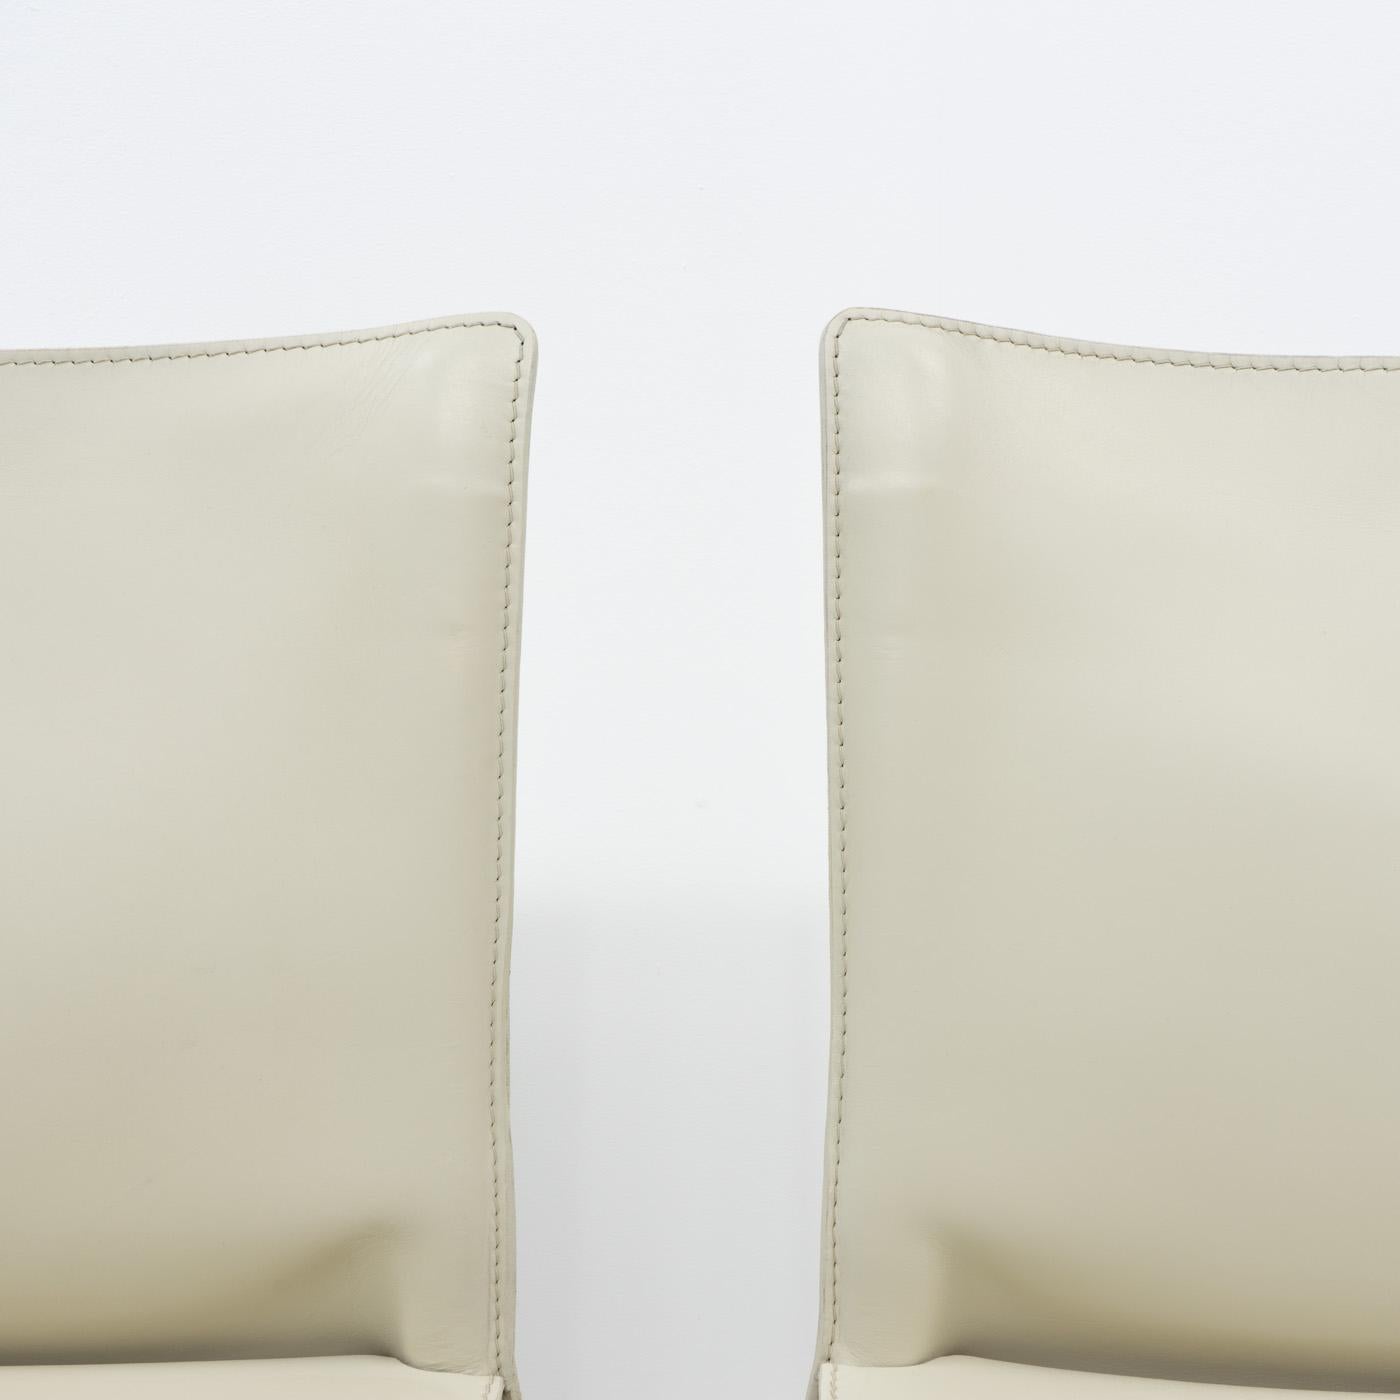 Cab 412 Chairs in Cream Leather by Mario Bellini for Cassina, Set of 4 For Sale 3